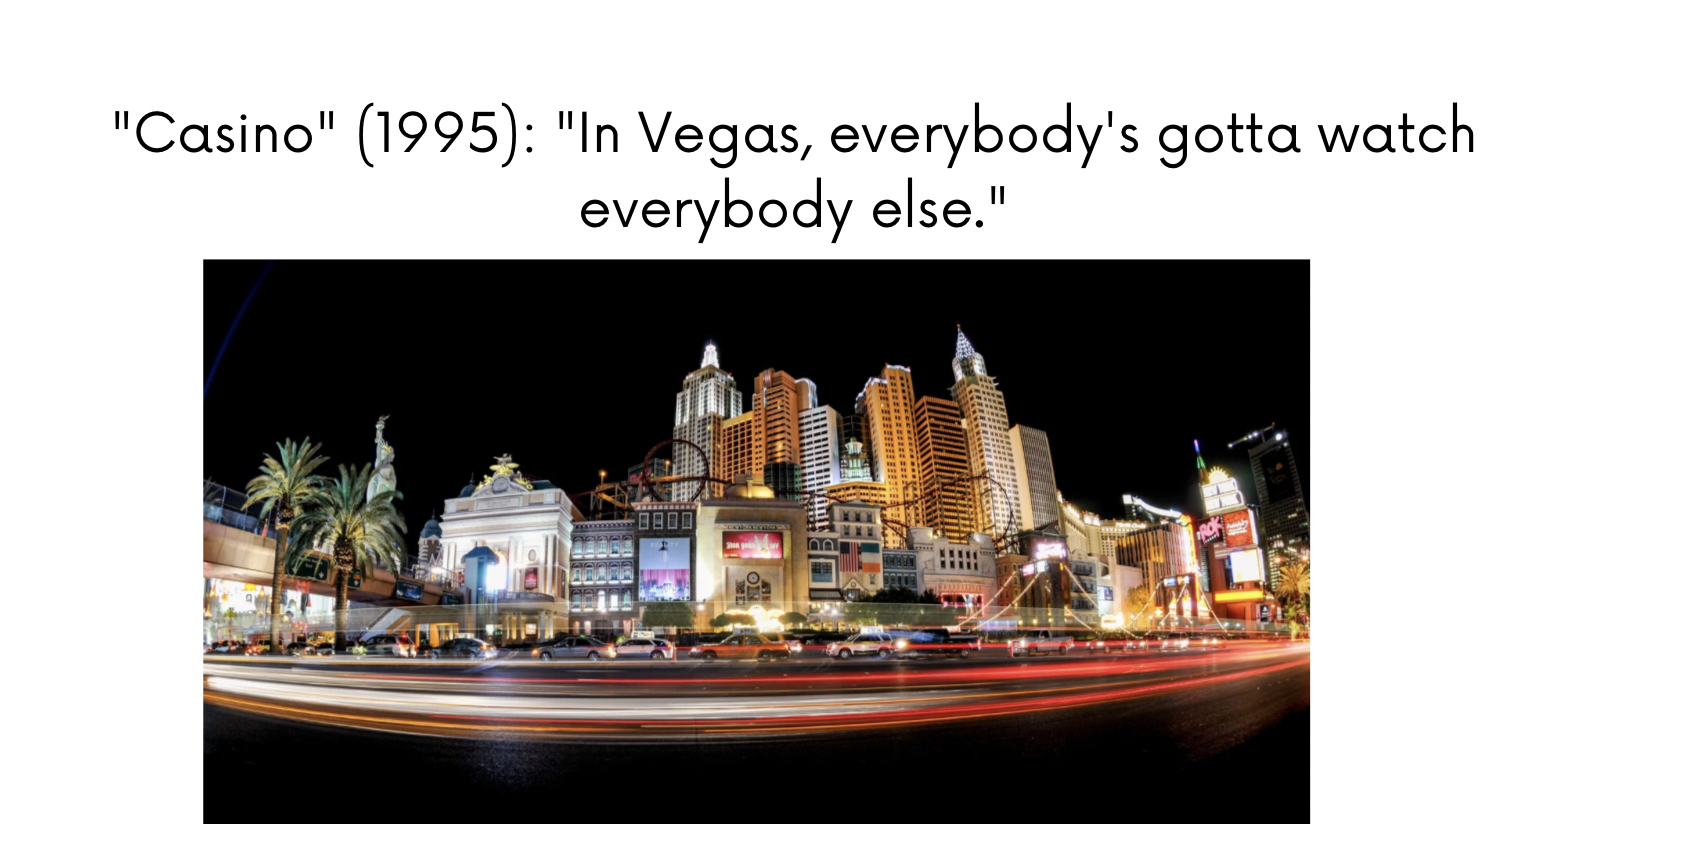 Las Vegas Quotes from Movies